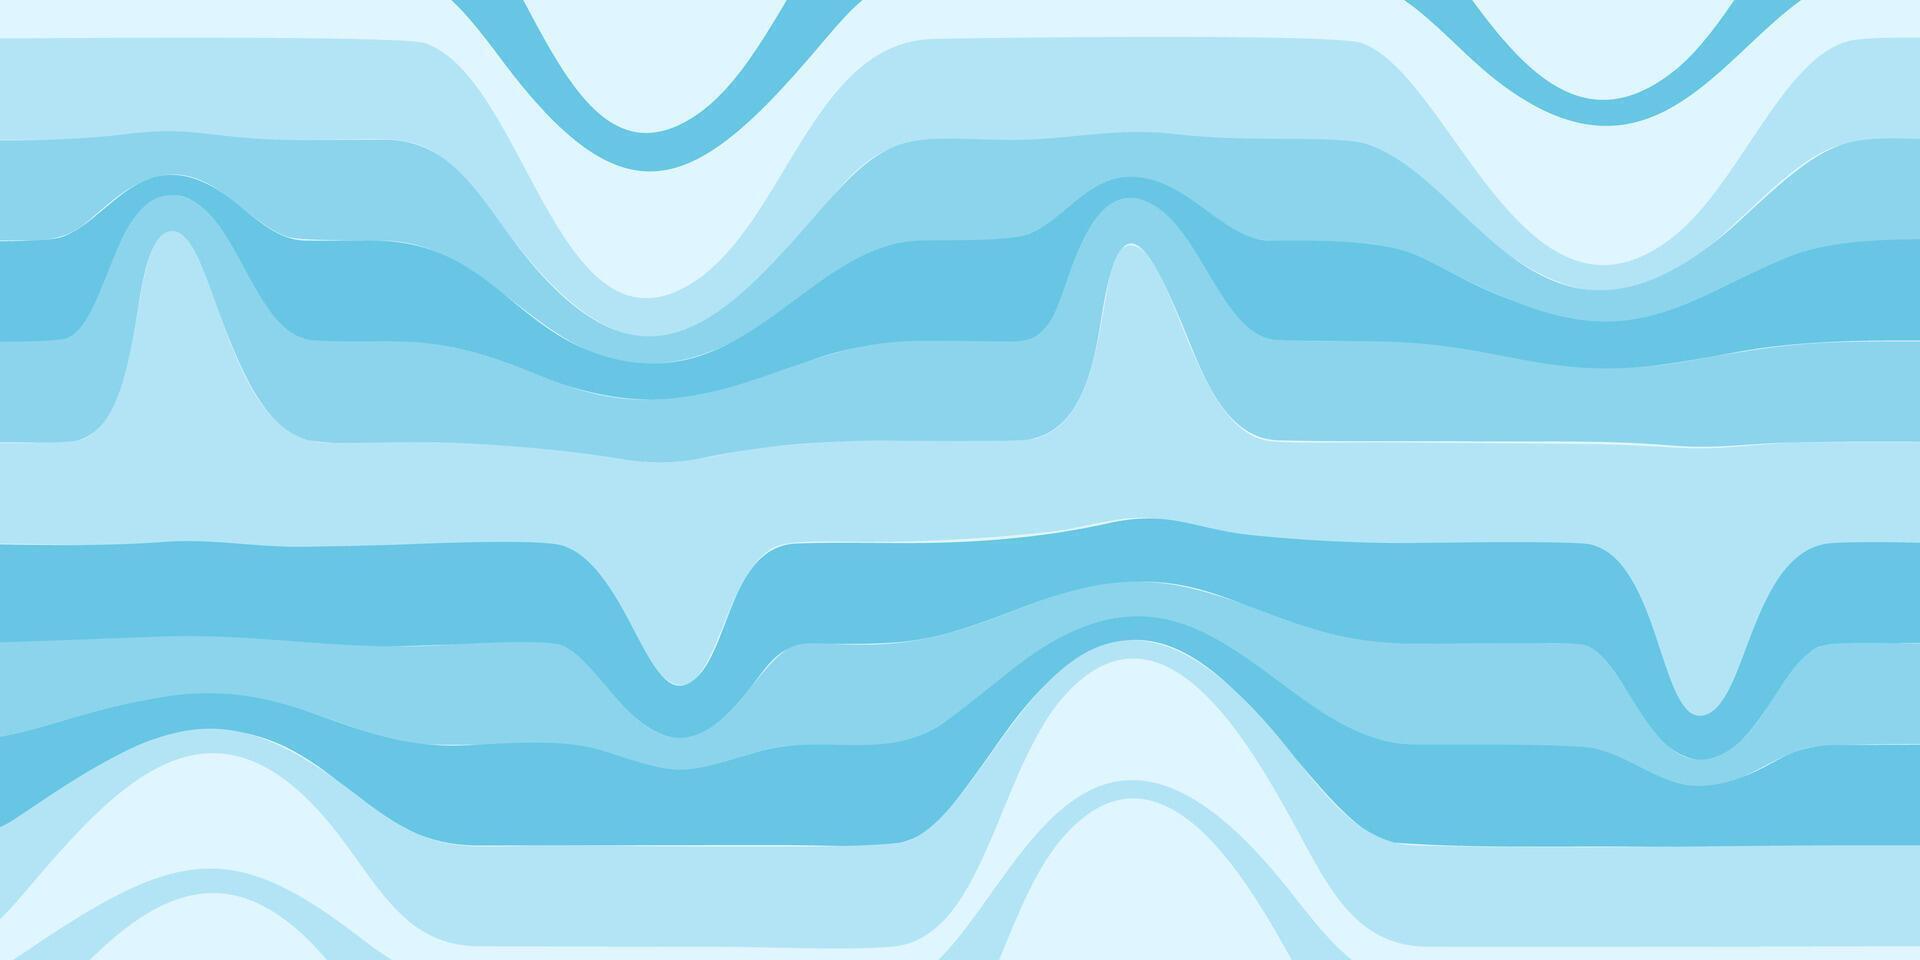 Blue Abstract Wave Background. Vector For Banners, Posters, Brochures, Social Media. Trendy and Modern Design